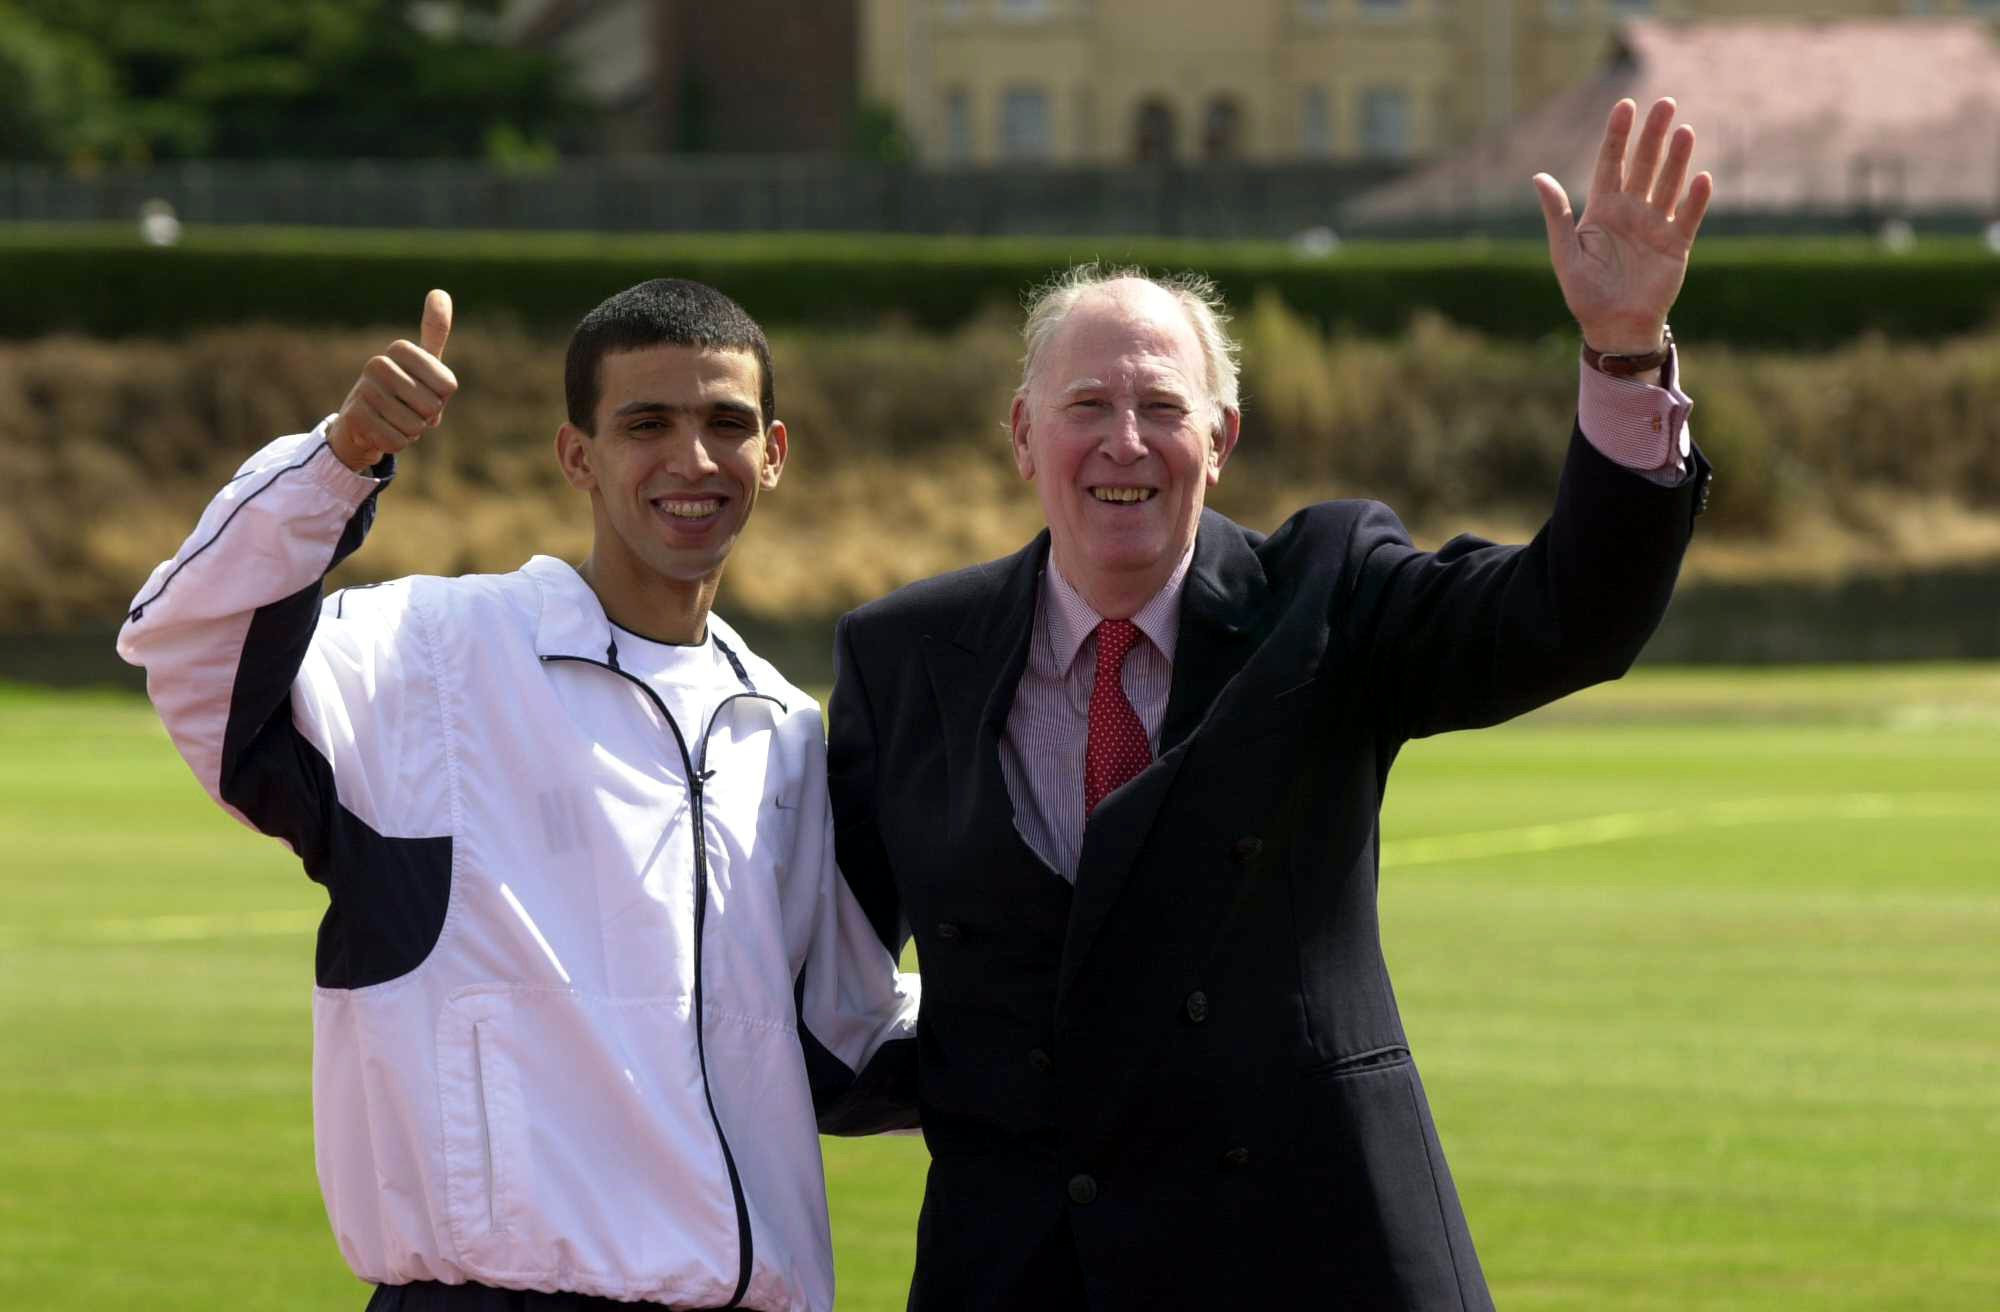 Morocco's Hicham El Guerrouj, the 1500m and mile world record holder, pictured with the late Sir Roger Bannister ©Getty Images